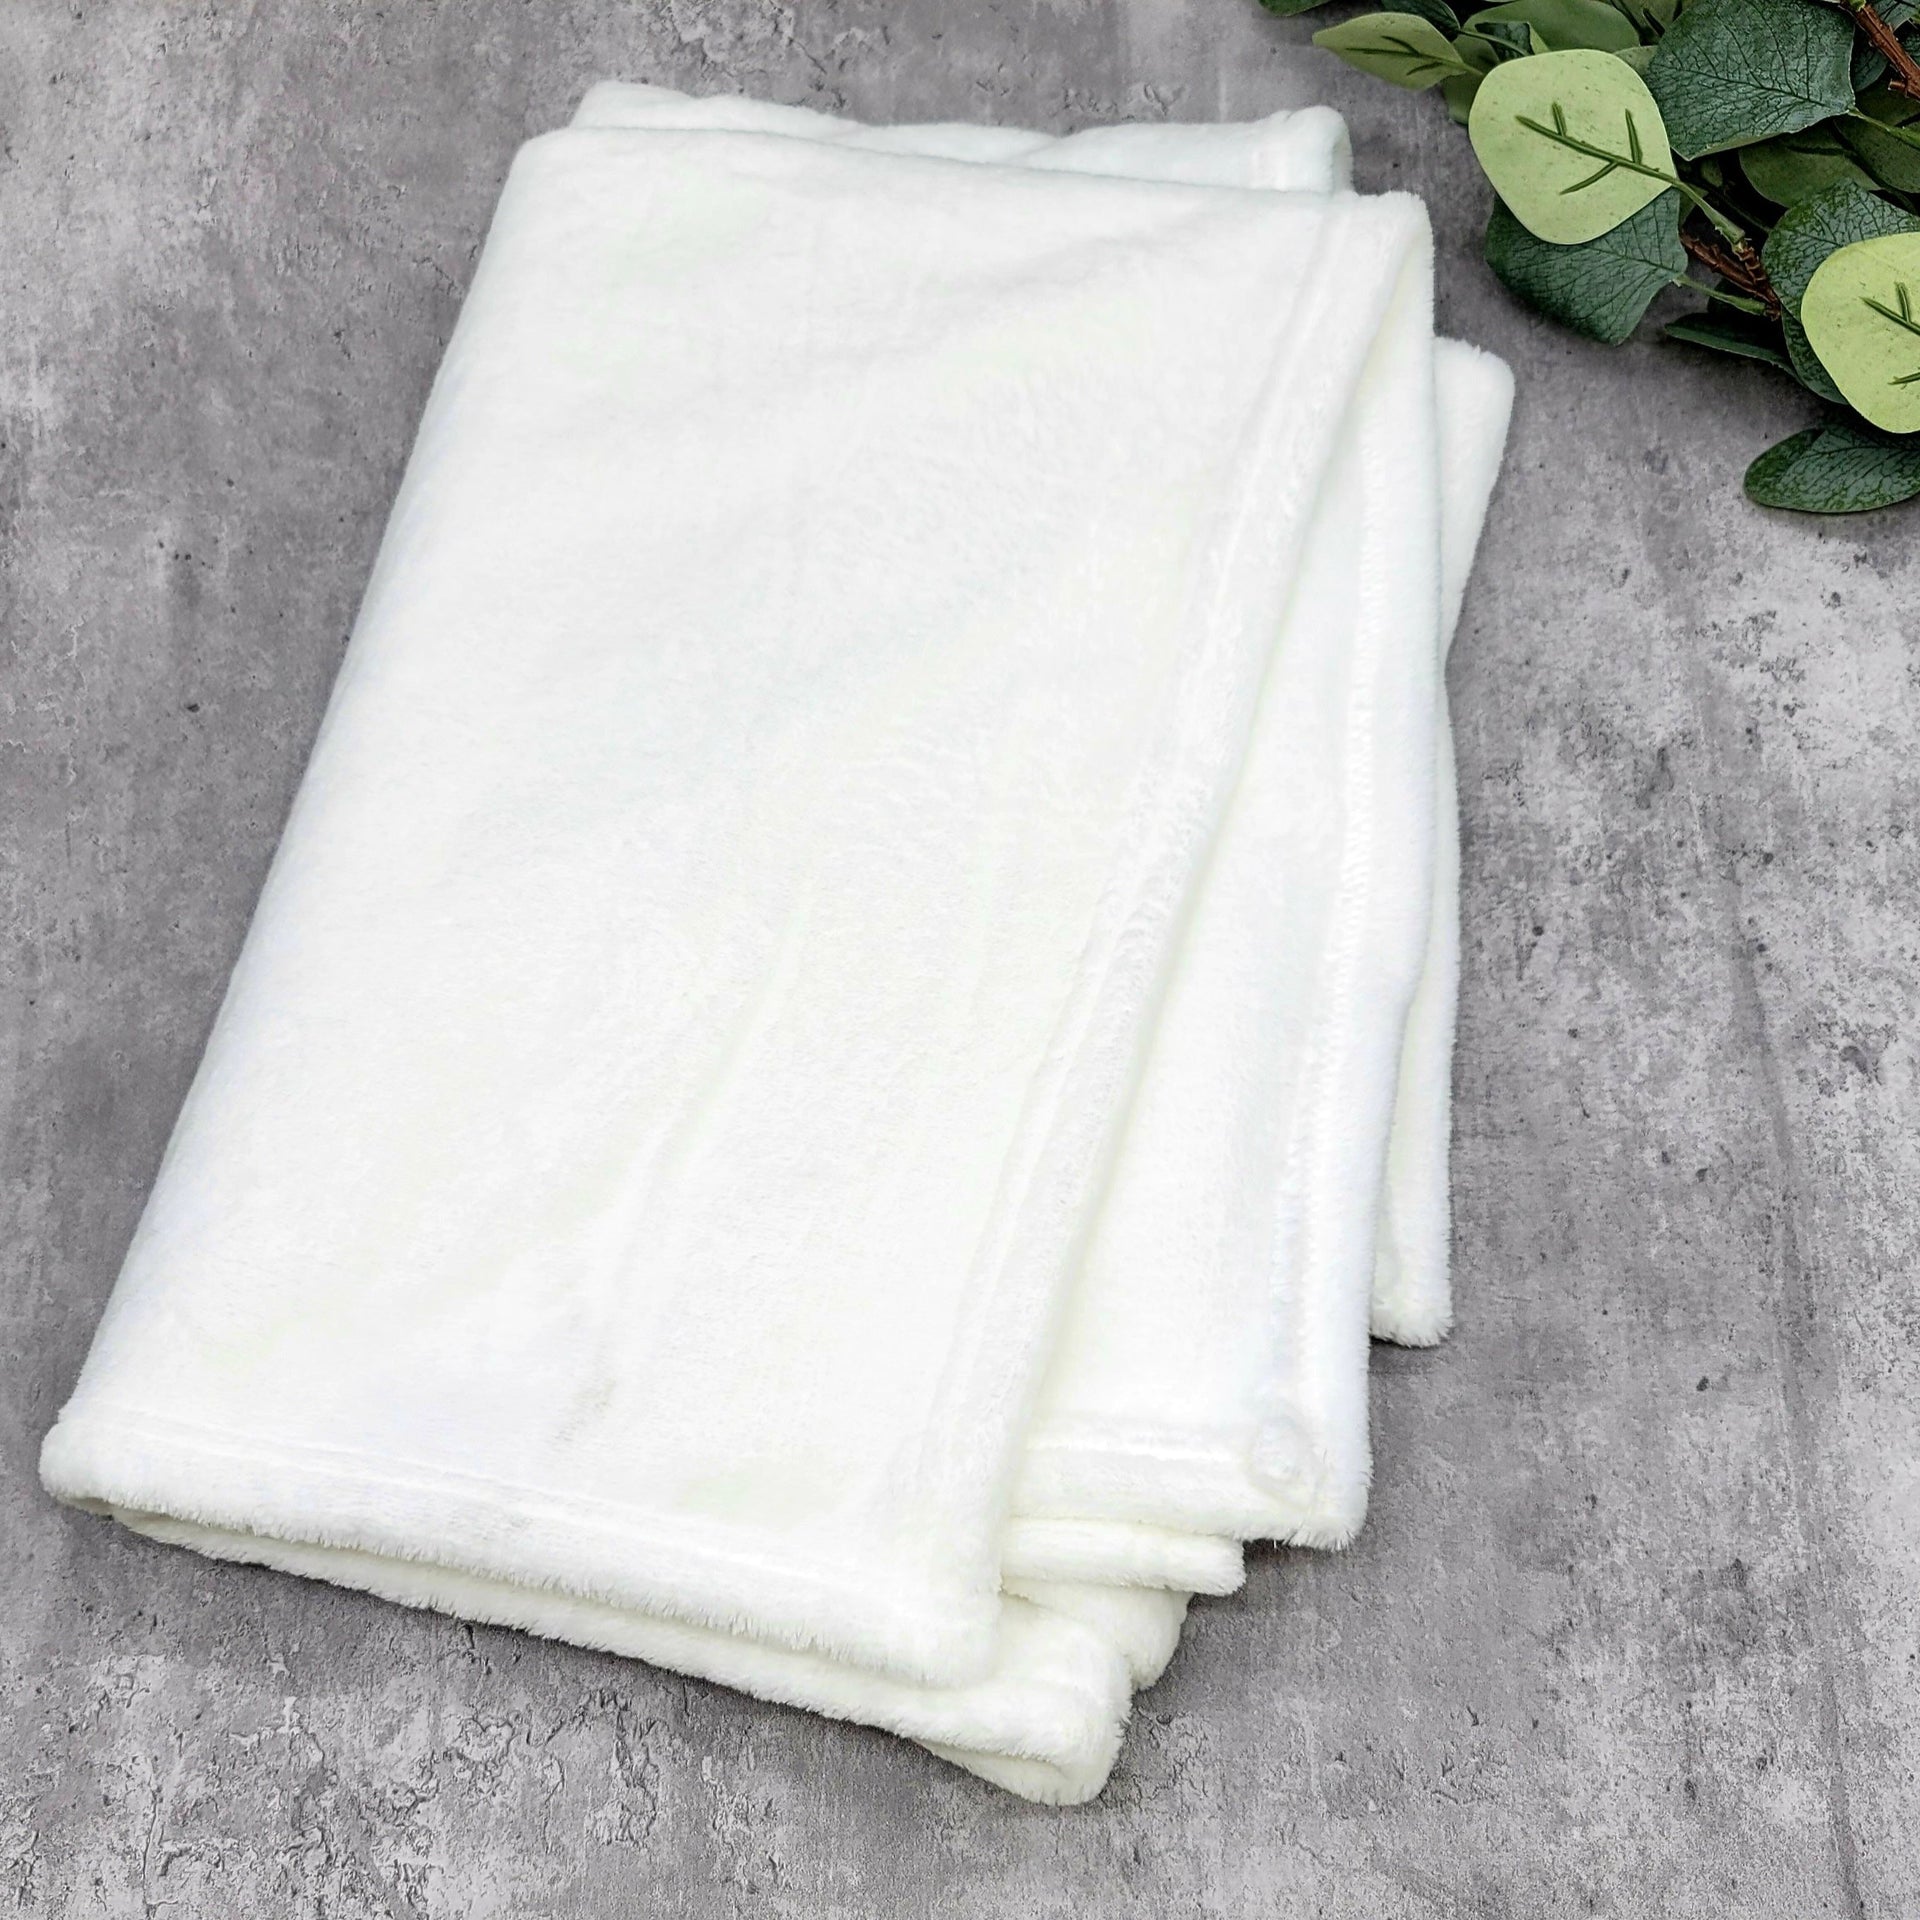 Blank Baby Blankets for Sublimation - 100% Polyester